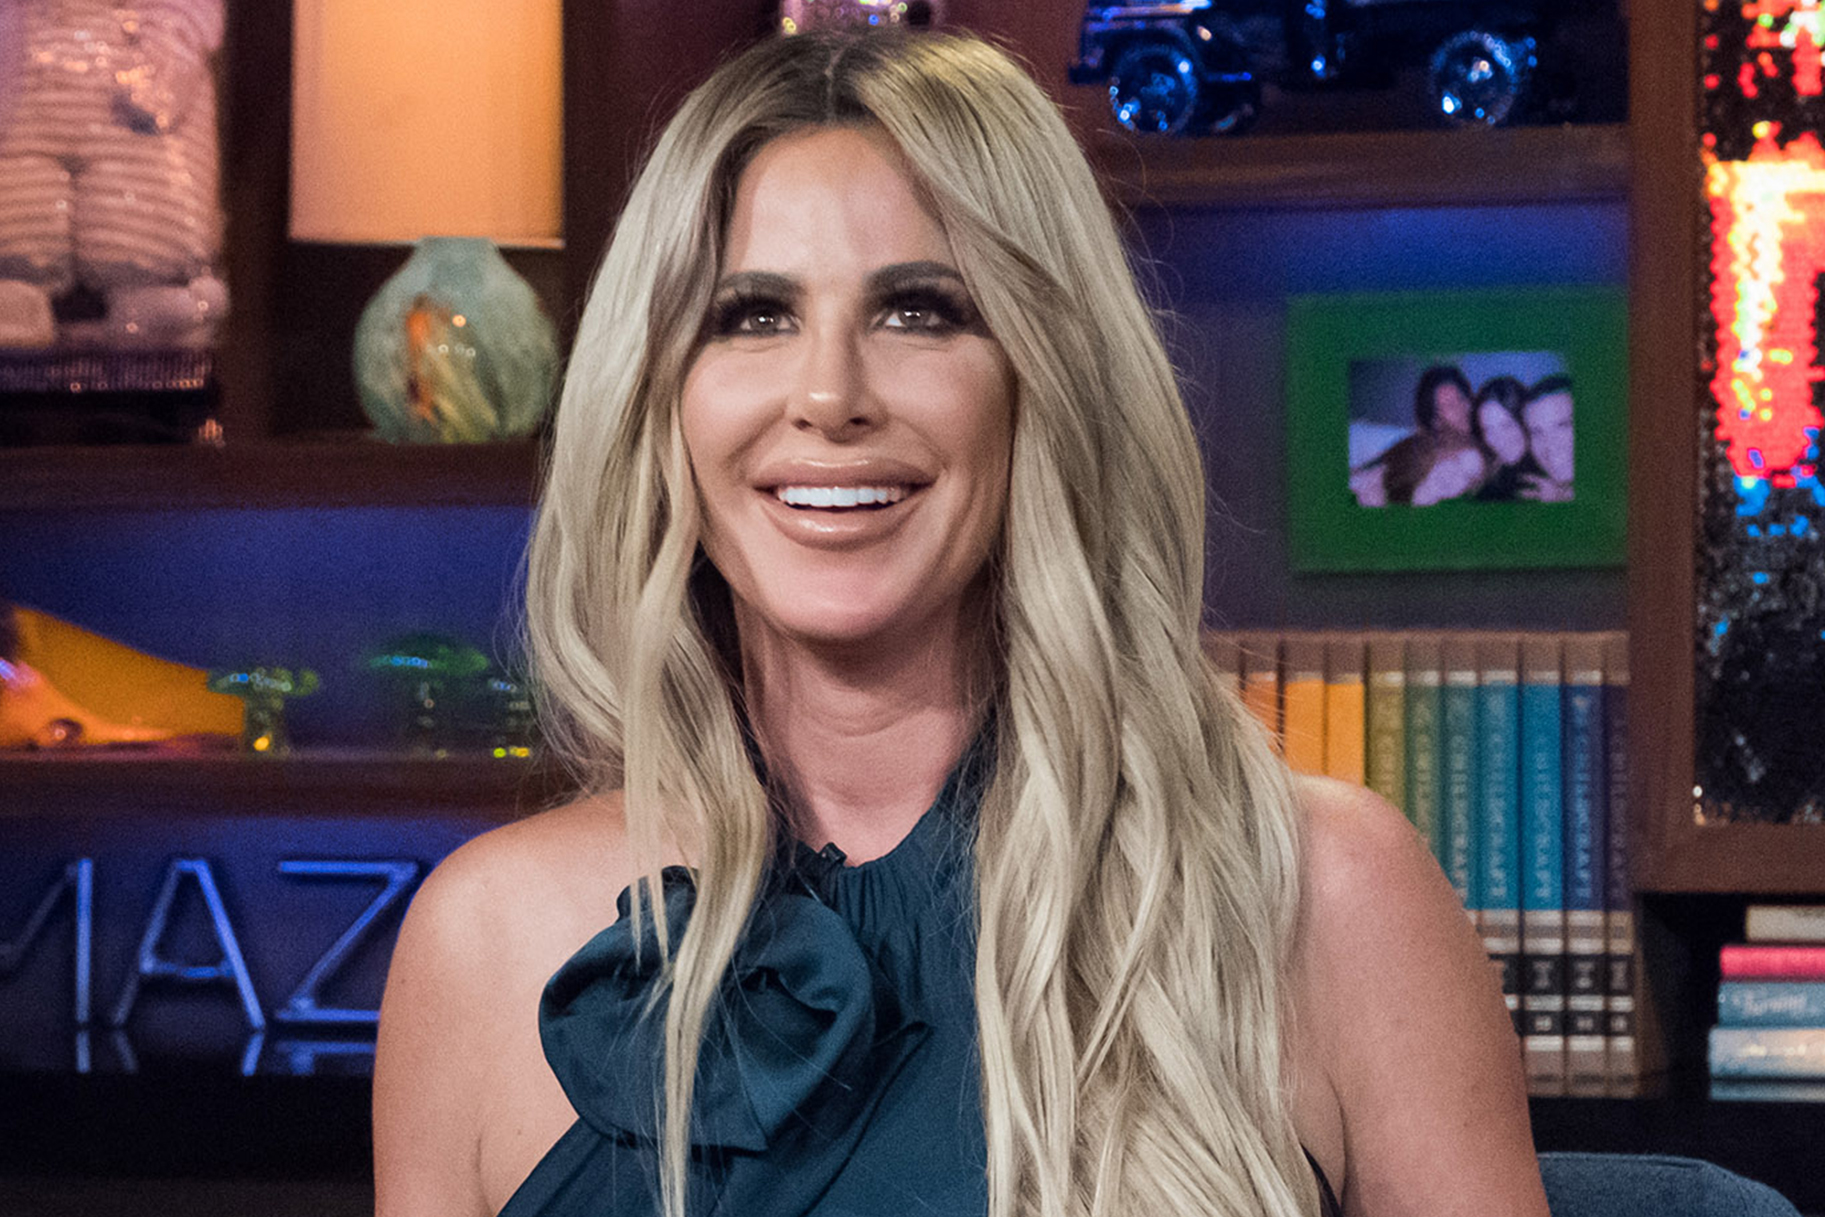 Kim Zolciak Brags About Gambling Away $250k While Vacationing In the Bahamas